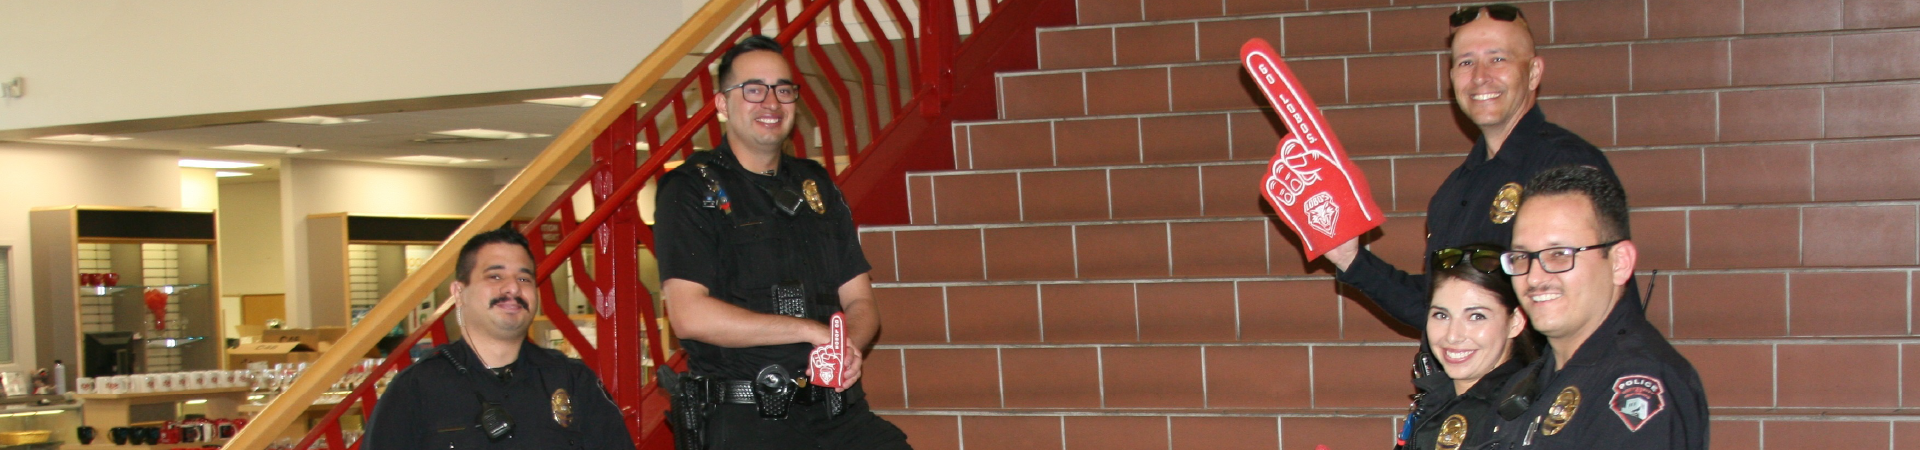 Officers smile, posing on stairs inside bookstore